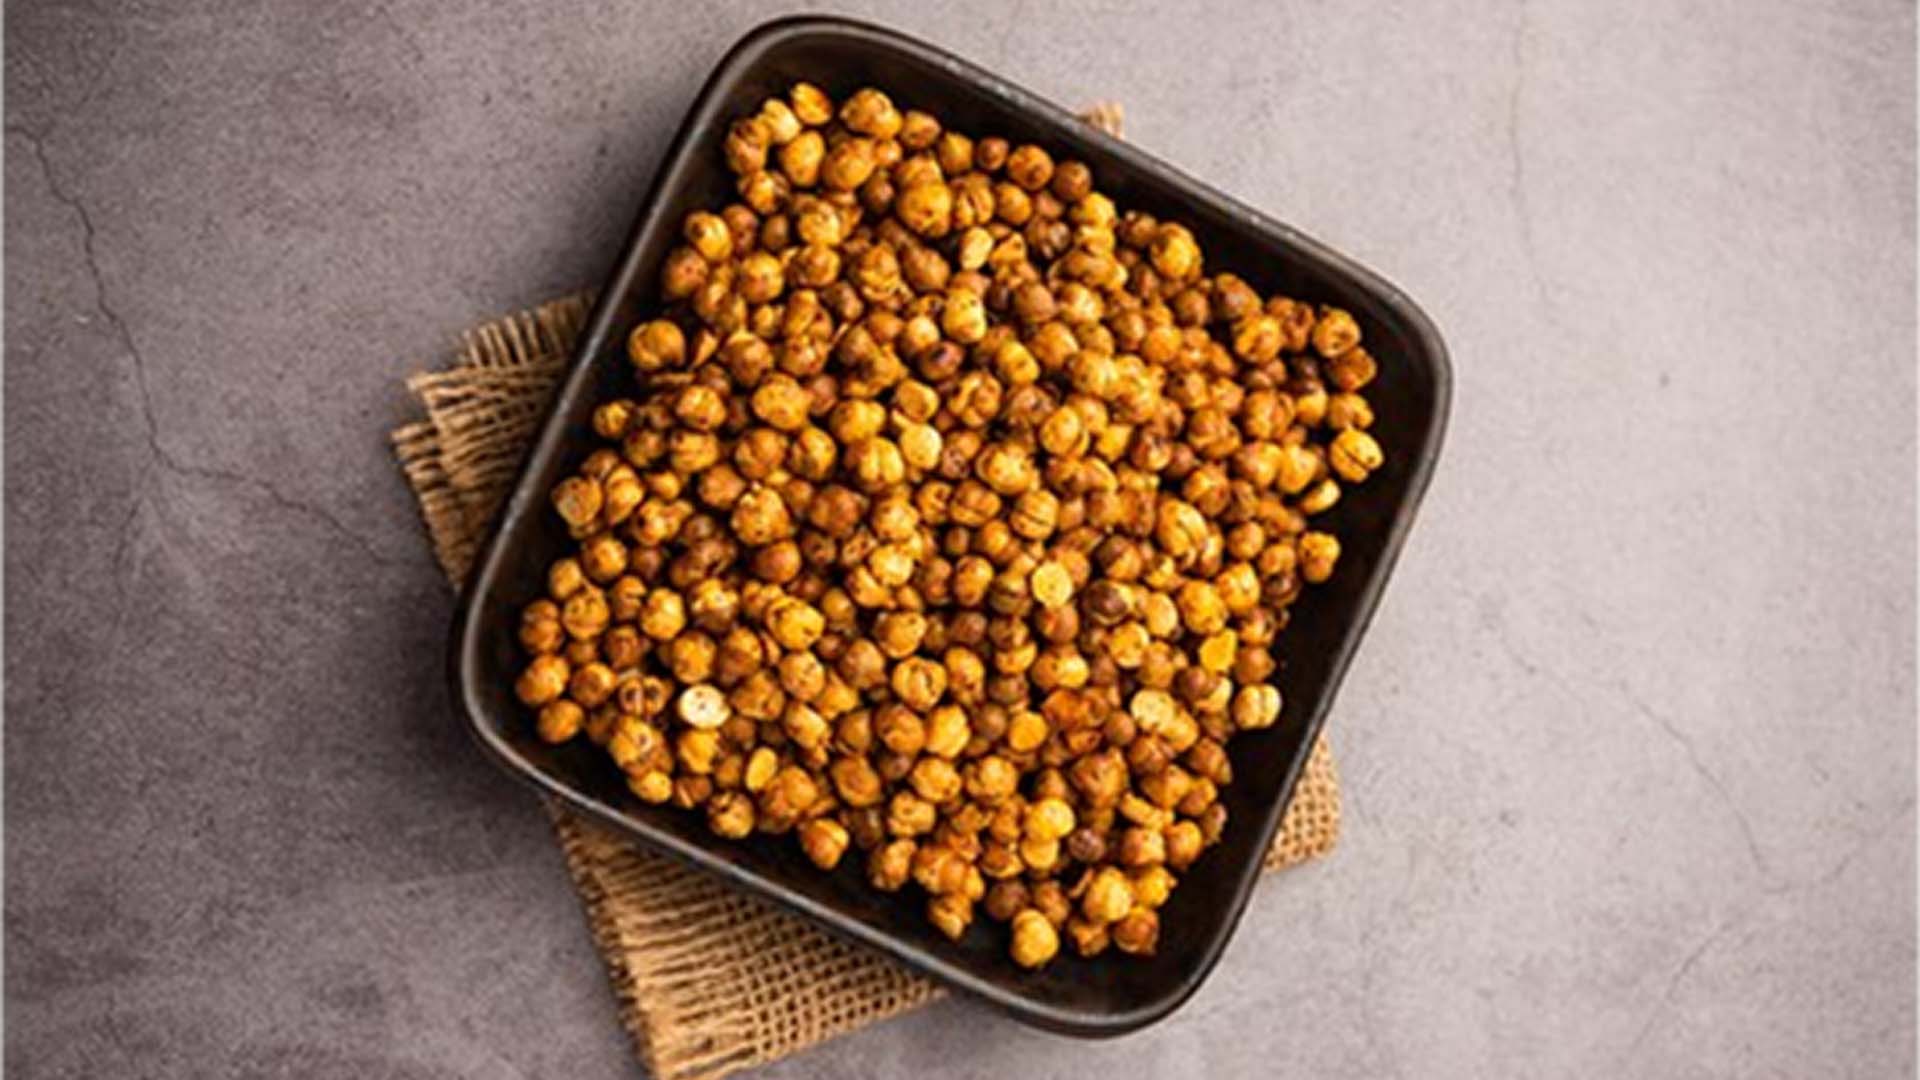 What are the Nutrition Facts of Roasted Chana Per 100g?